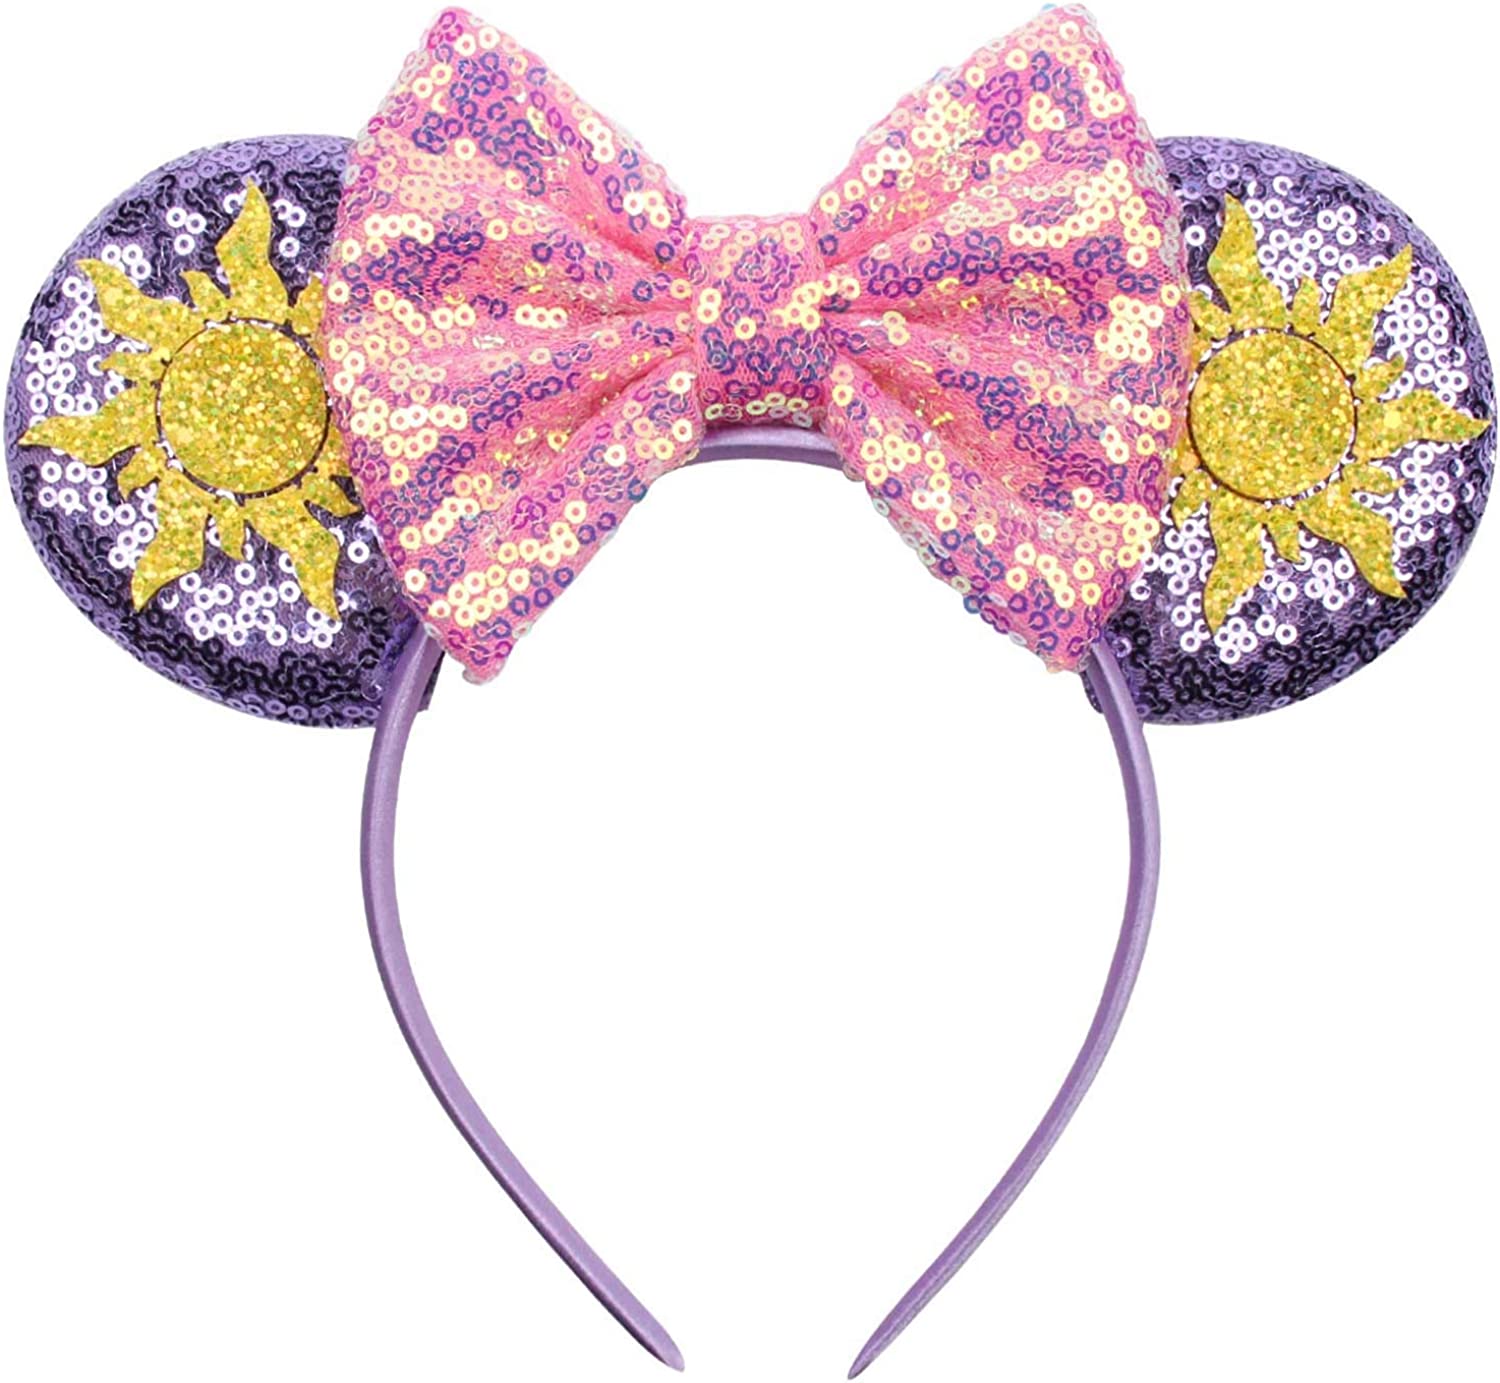 Mouse Ears Headband Sequin Cosplay Costume Purple Ears Pink Bow Headwear for Women Girls Birthday Princess Party Holiday Theme Park Favor Decorations Hair Accessories